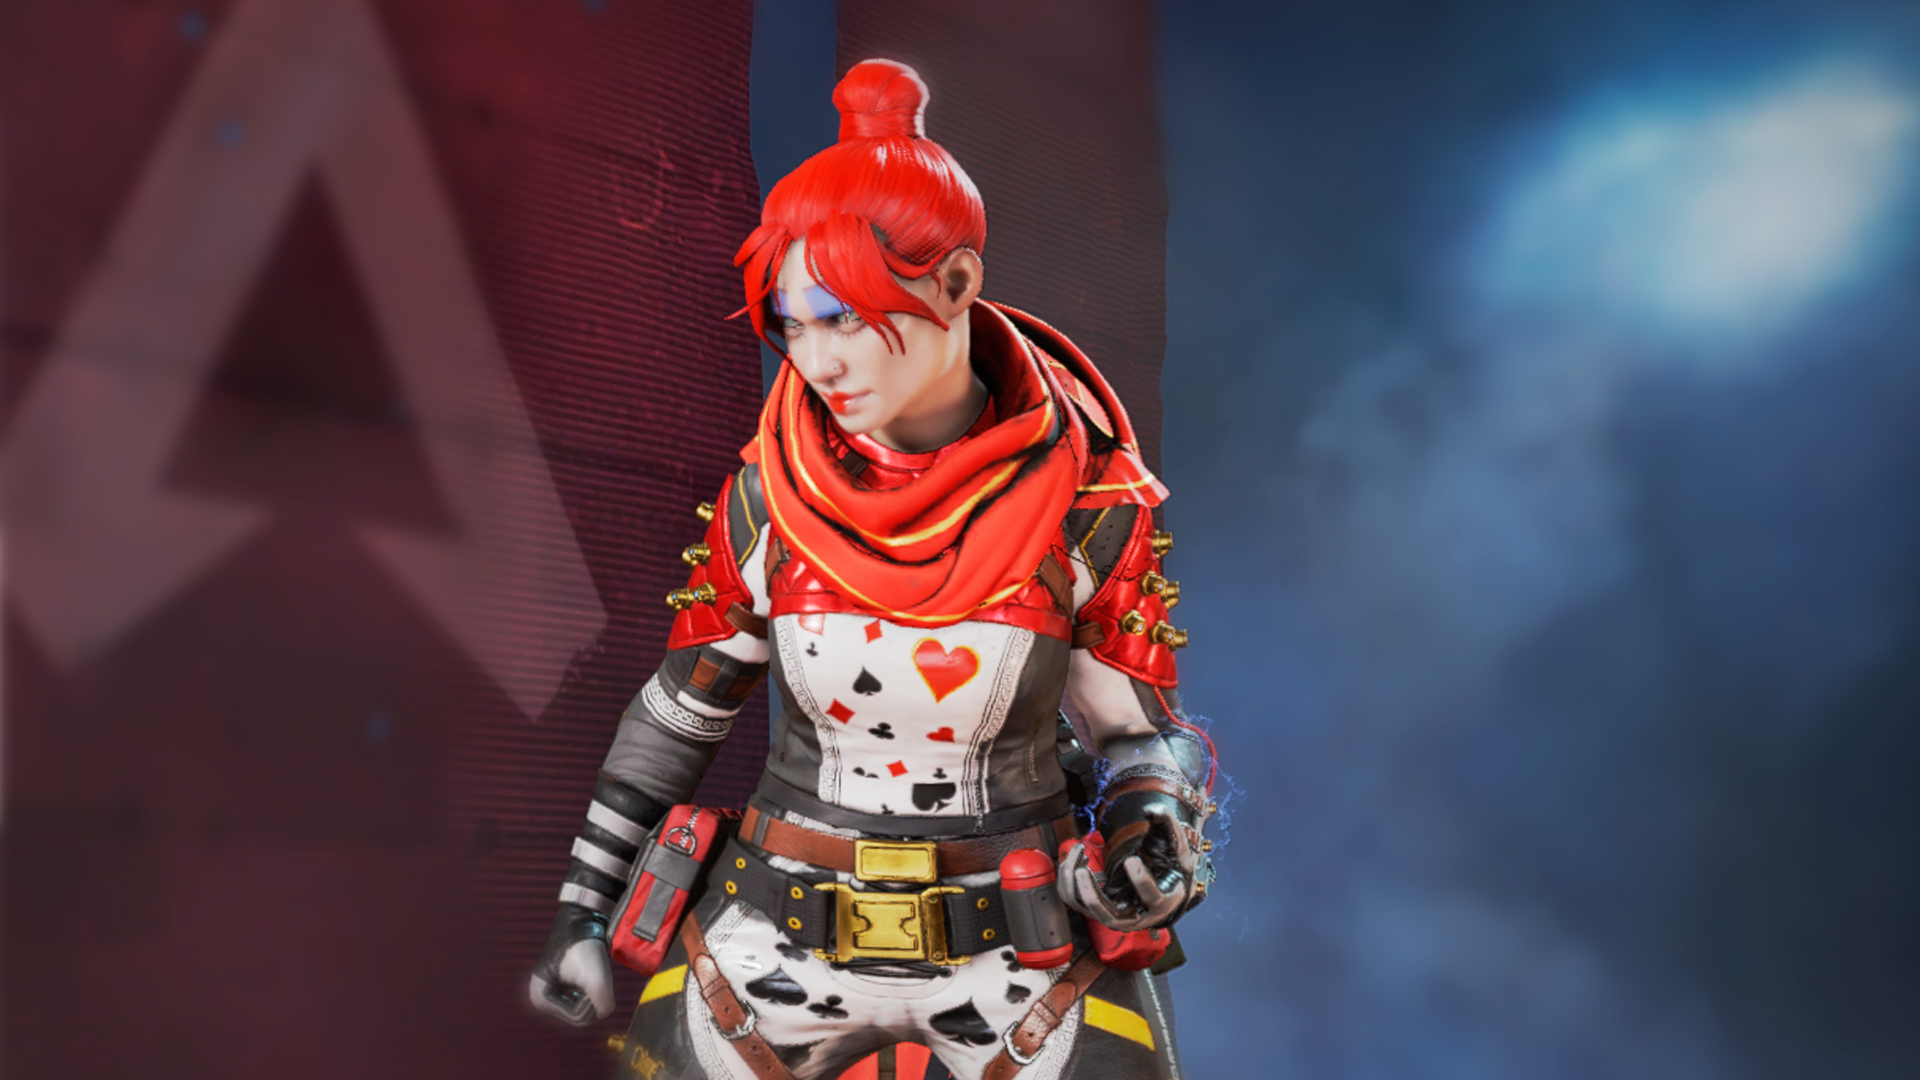 Apex Legends Wraith Skin: Queen of Hearts